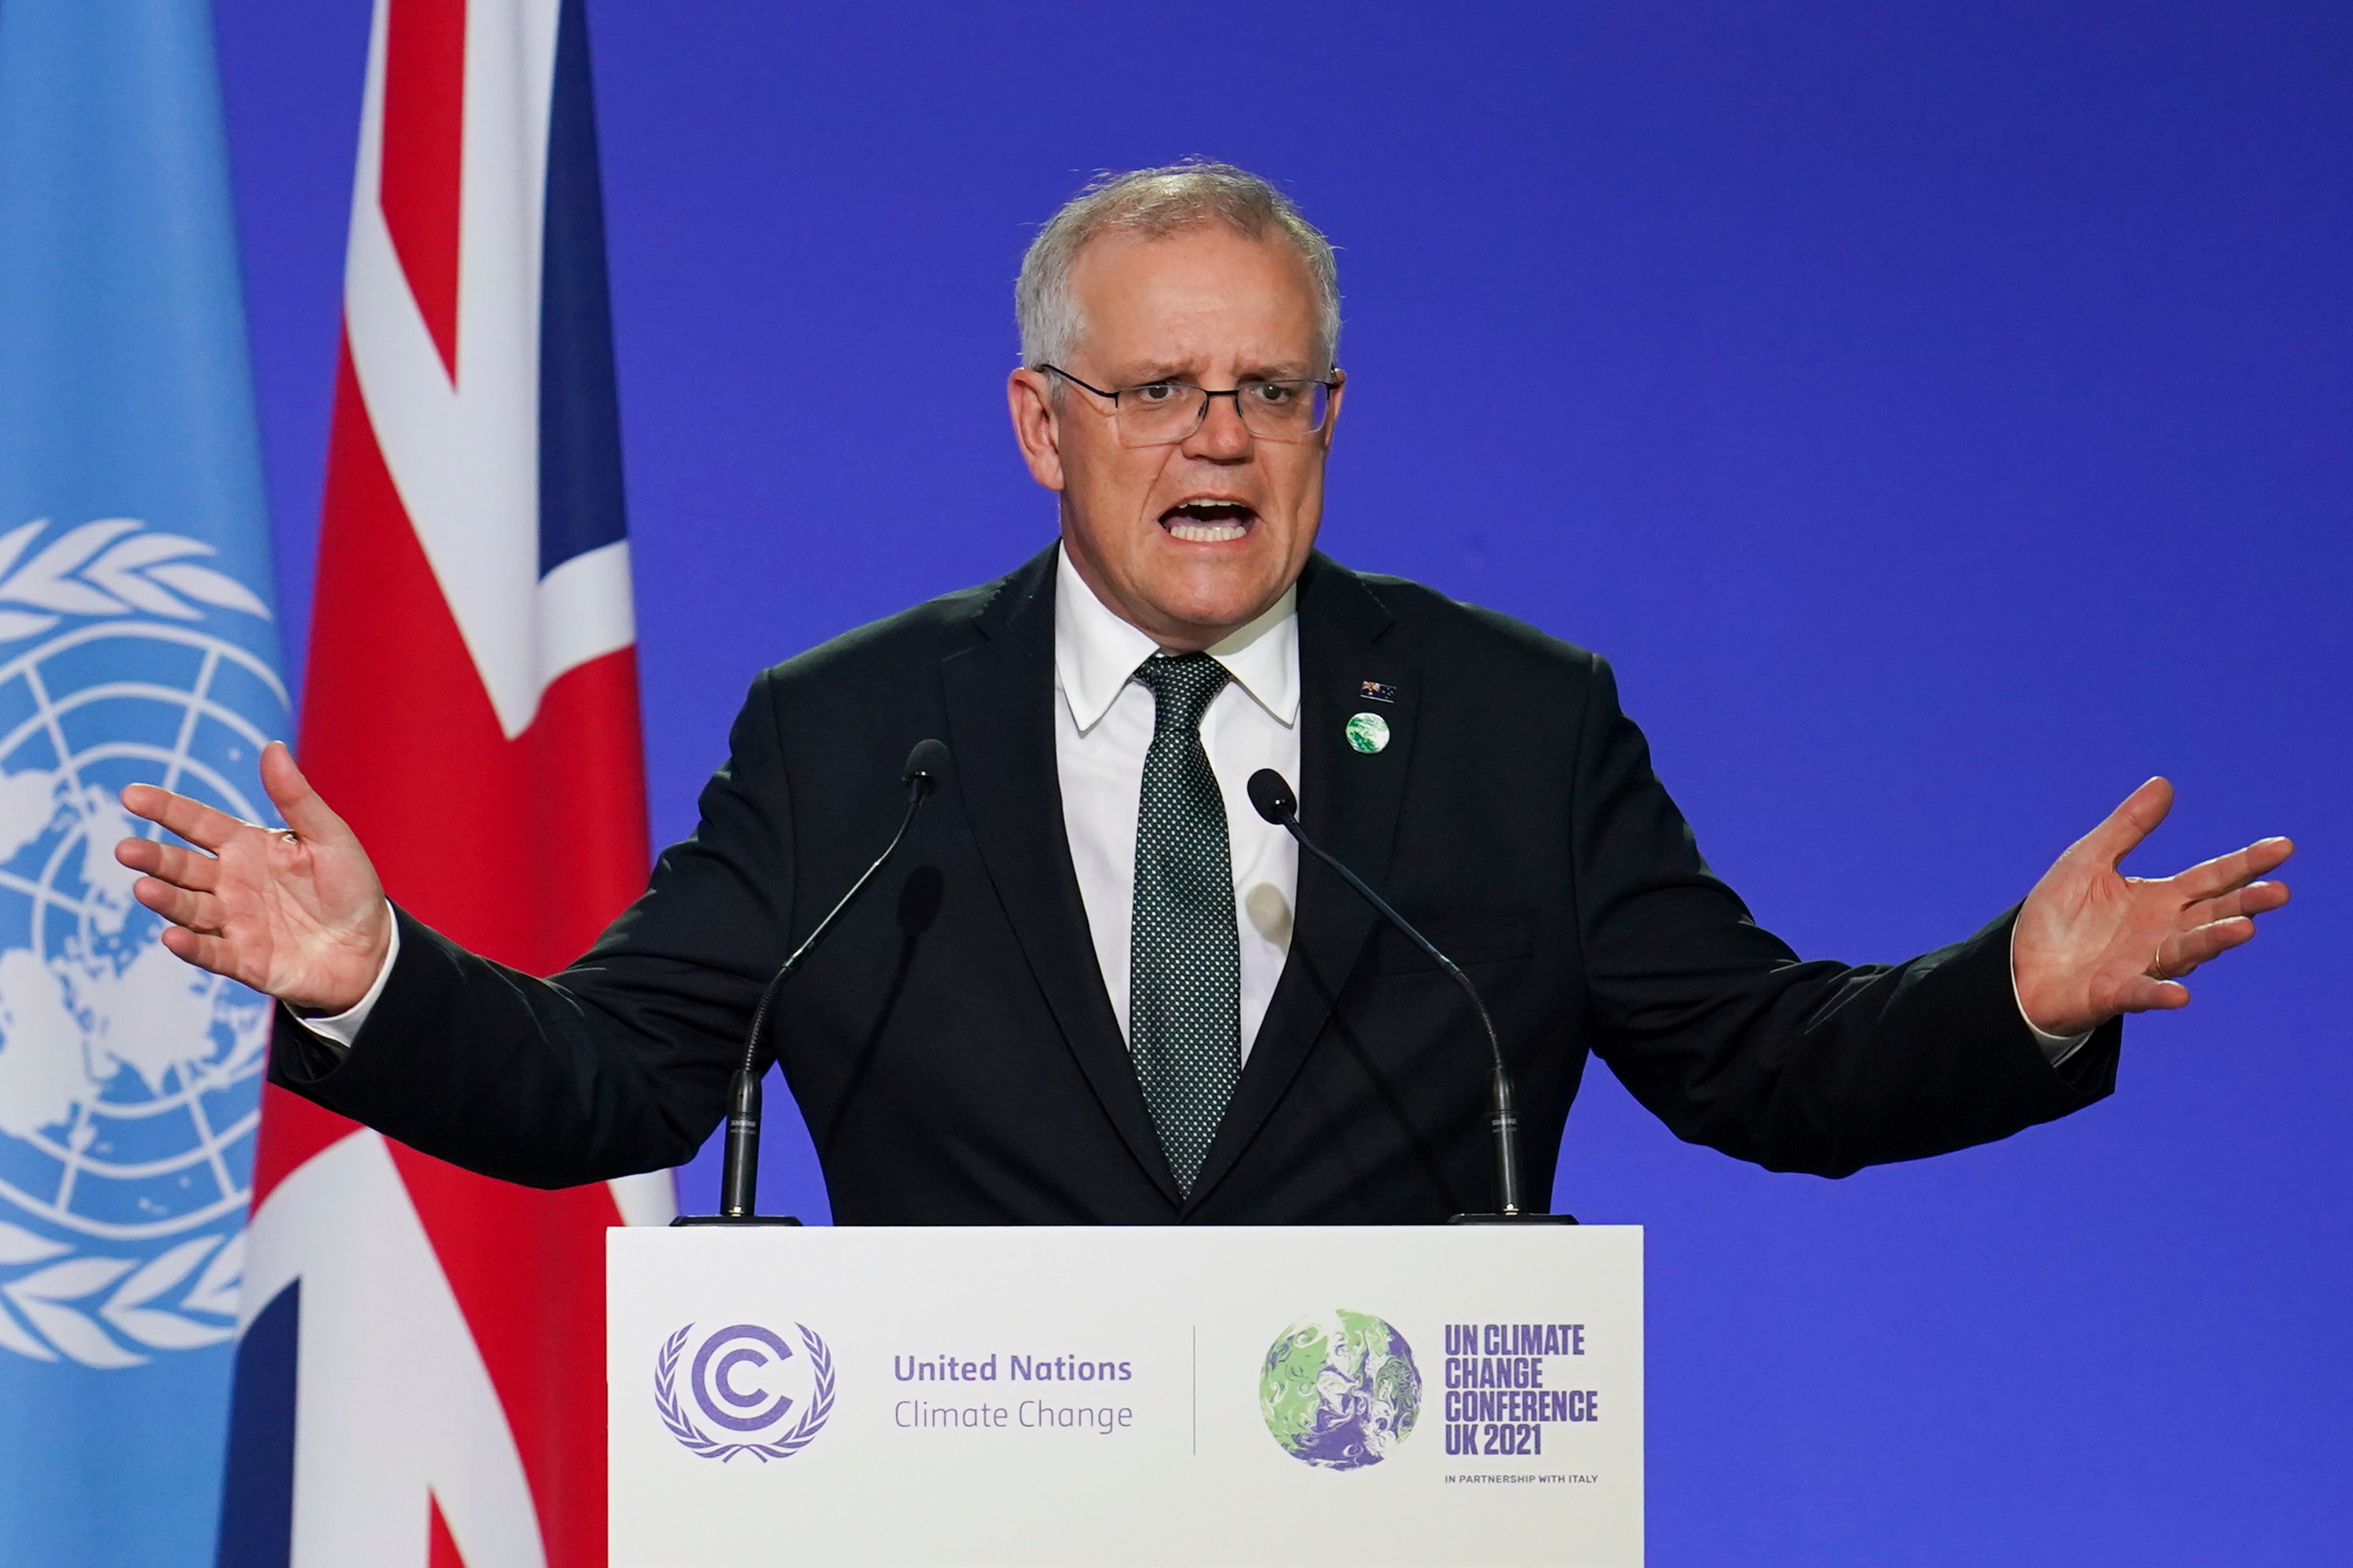 Prime Minister Scott Morrison delivers an address during the COP26 summit at the SECC in Glasgow, Scotland.